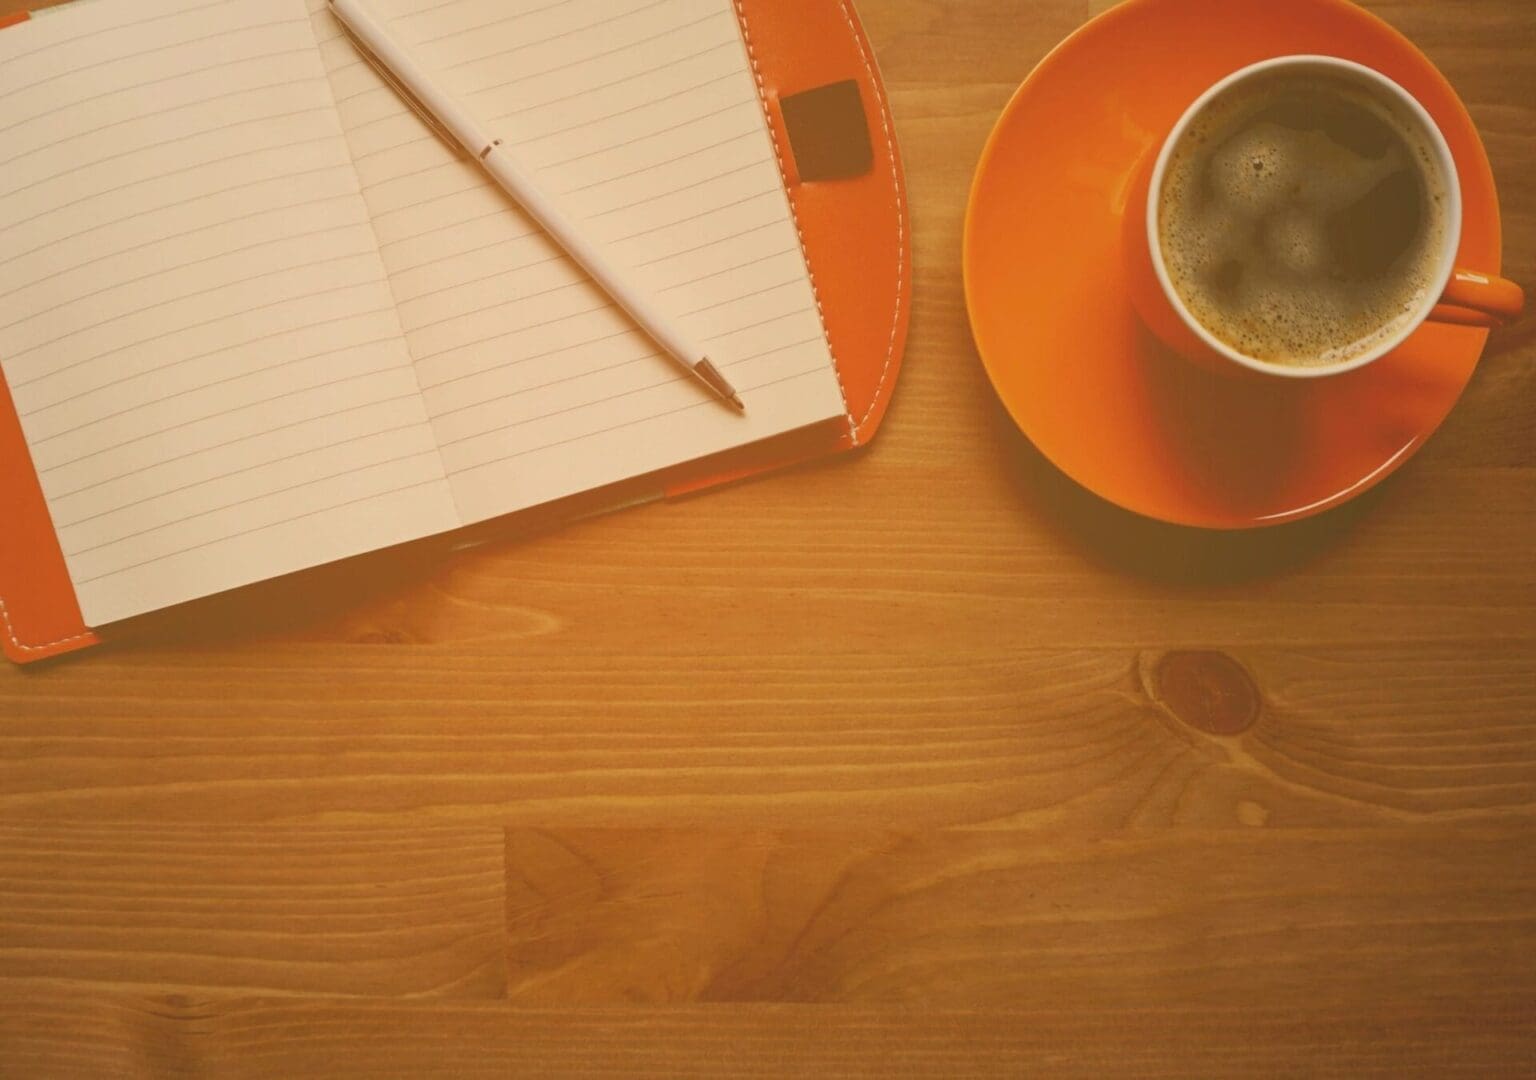 A cup of coffee next to an open notebook and pen on a wooden surface.